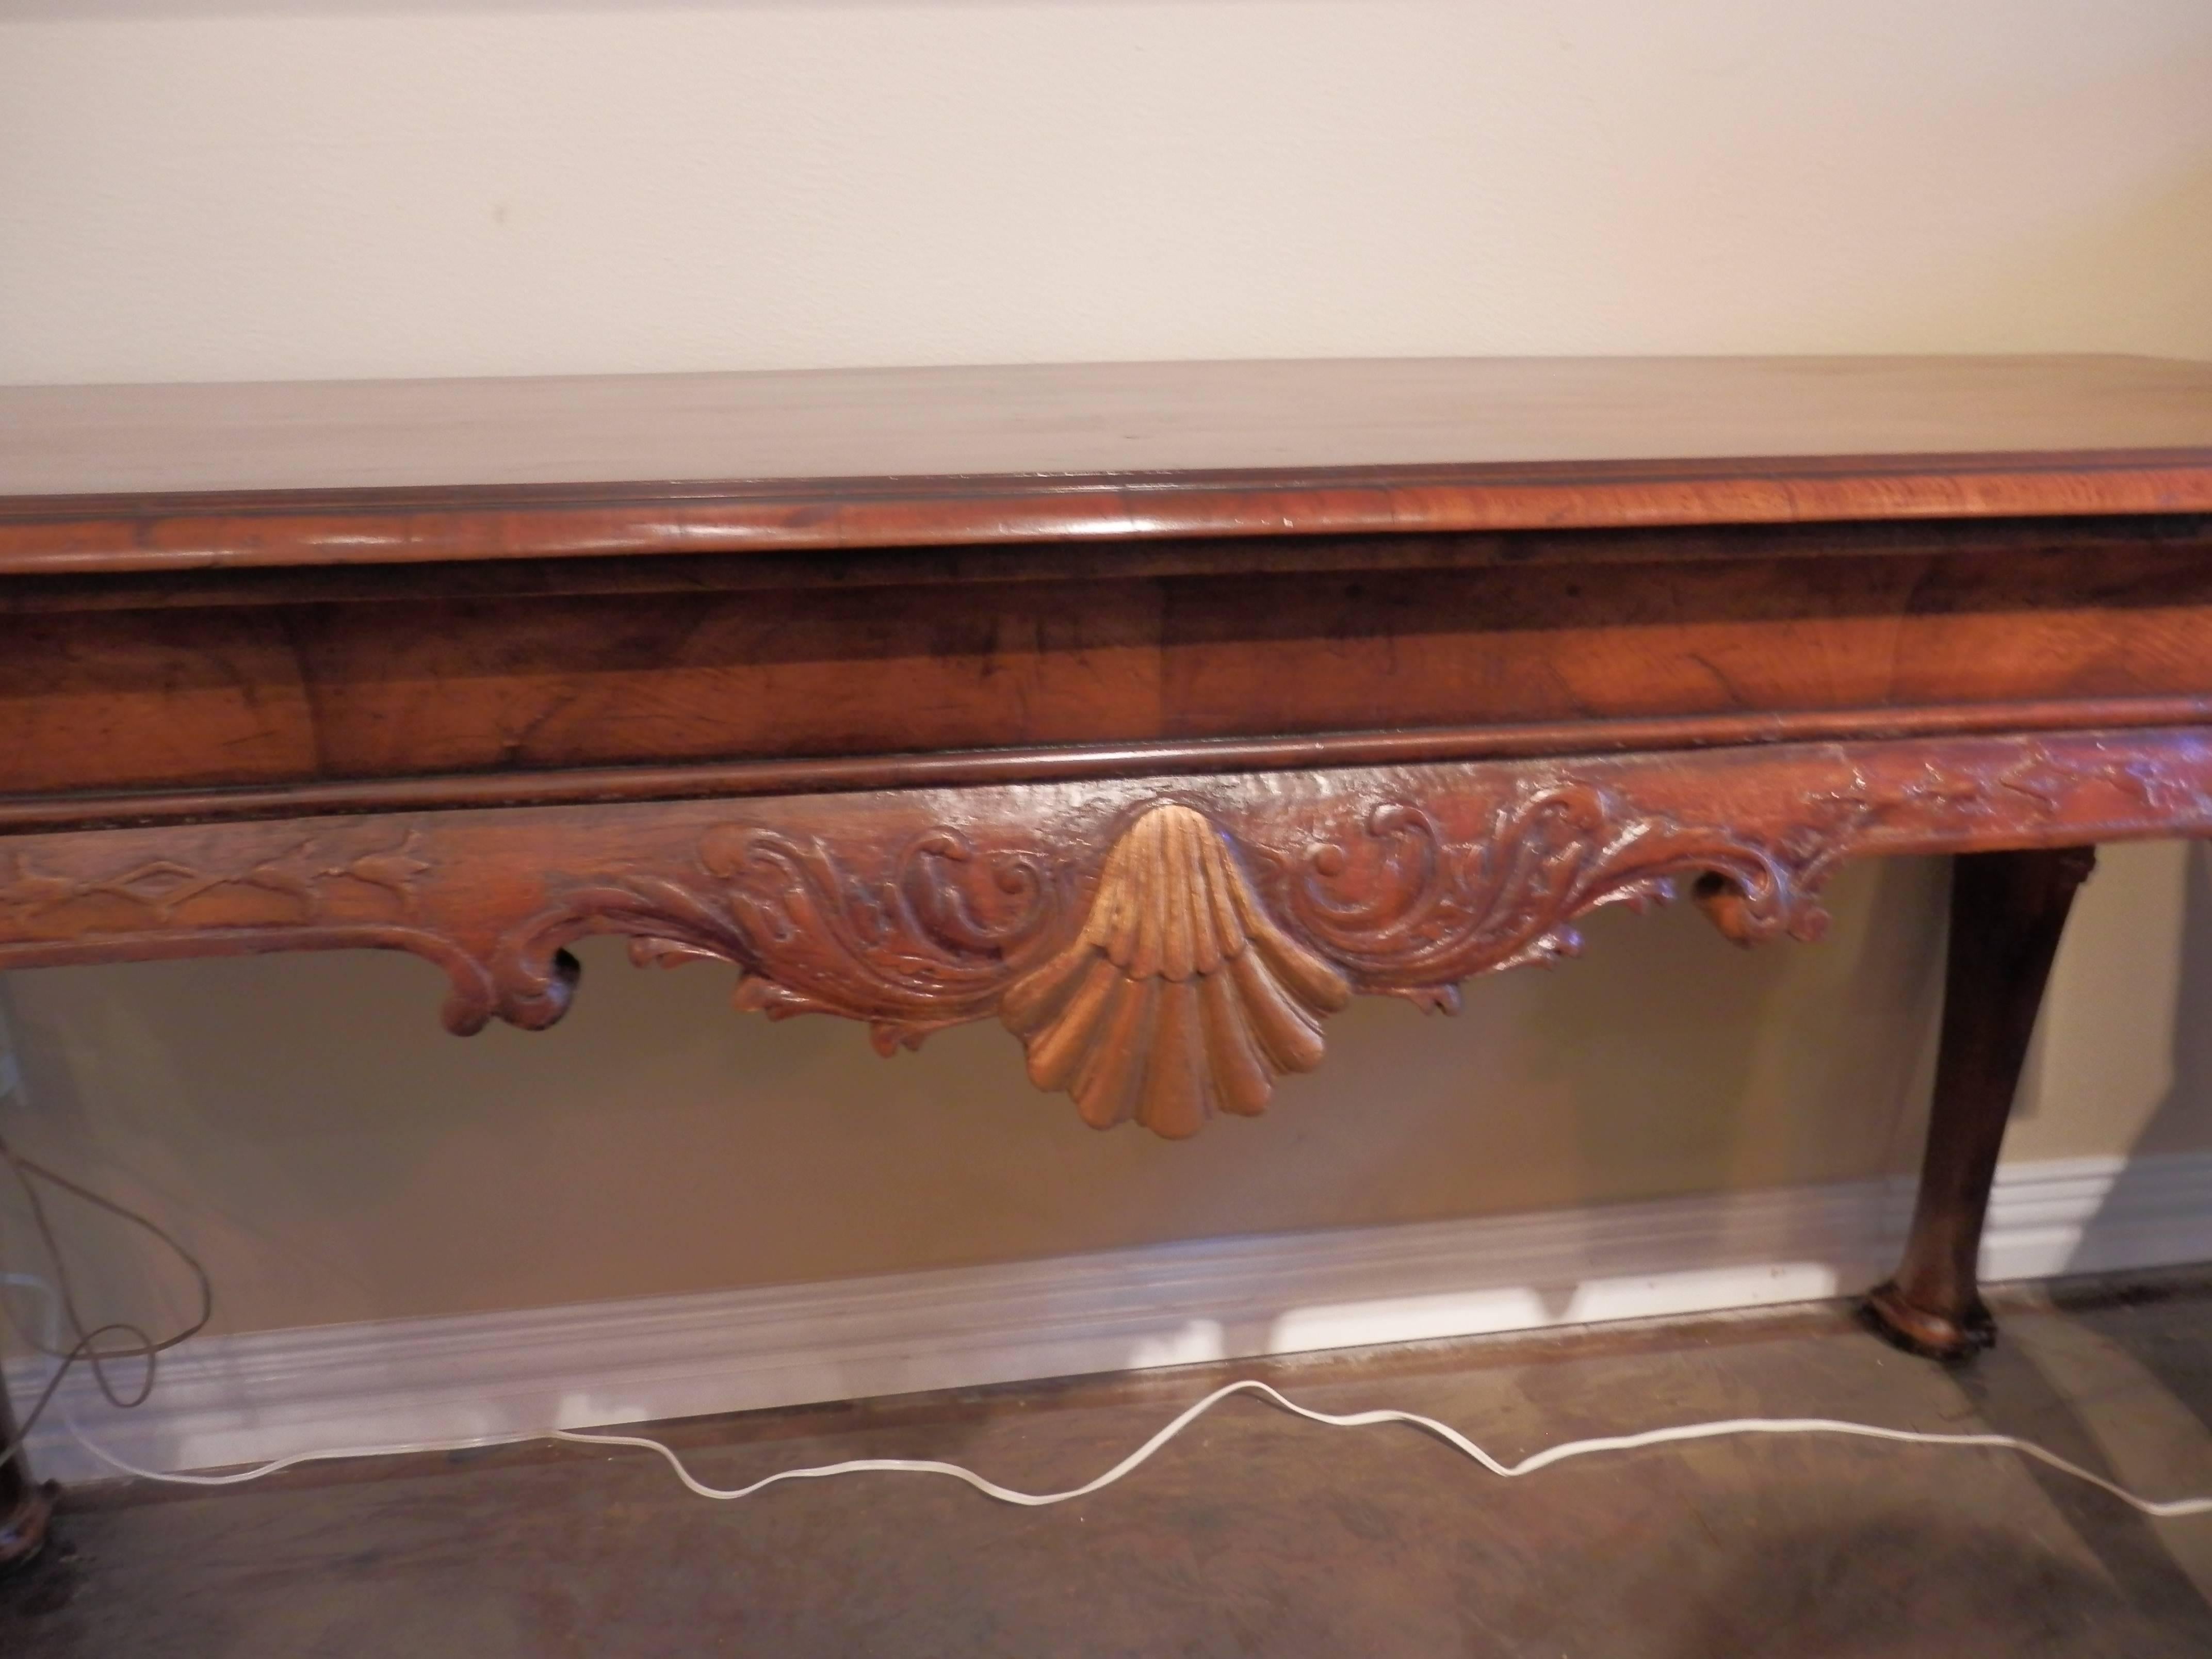 19th century Queen Anne pad foot walnut and parcel-gilt console table. Beautiful carved shell design in the middle. Beautiful burled walnut matched grain top.